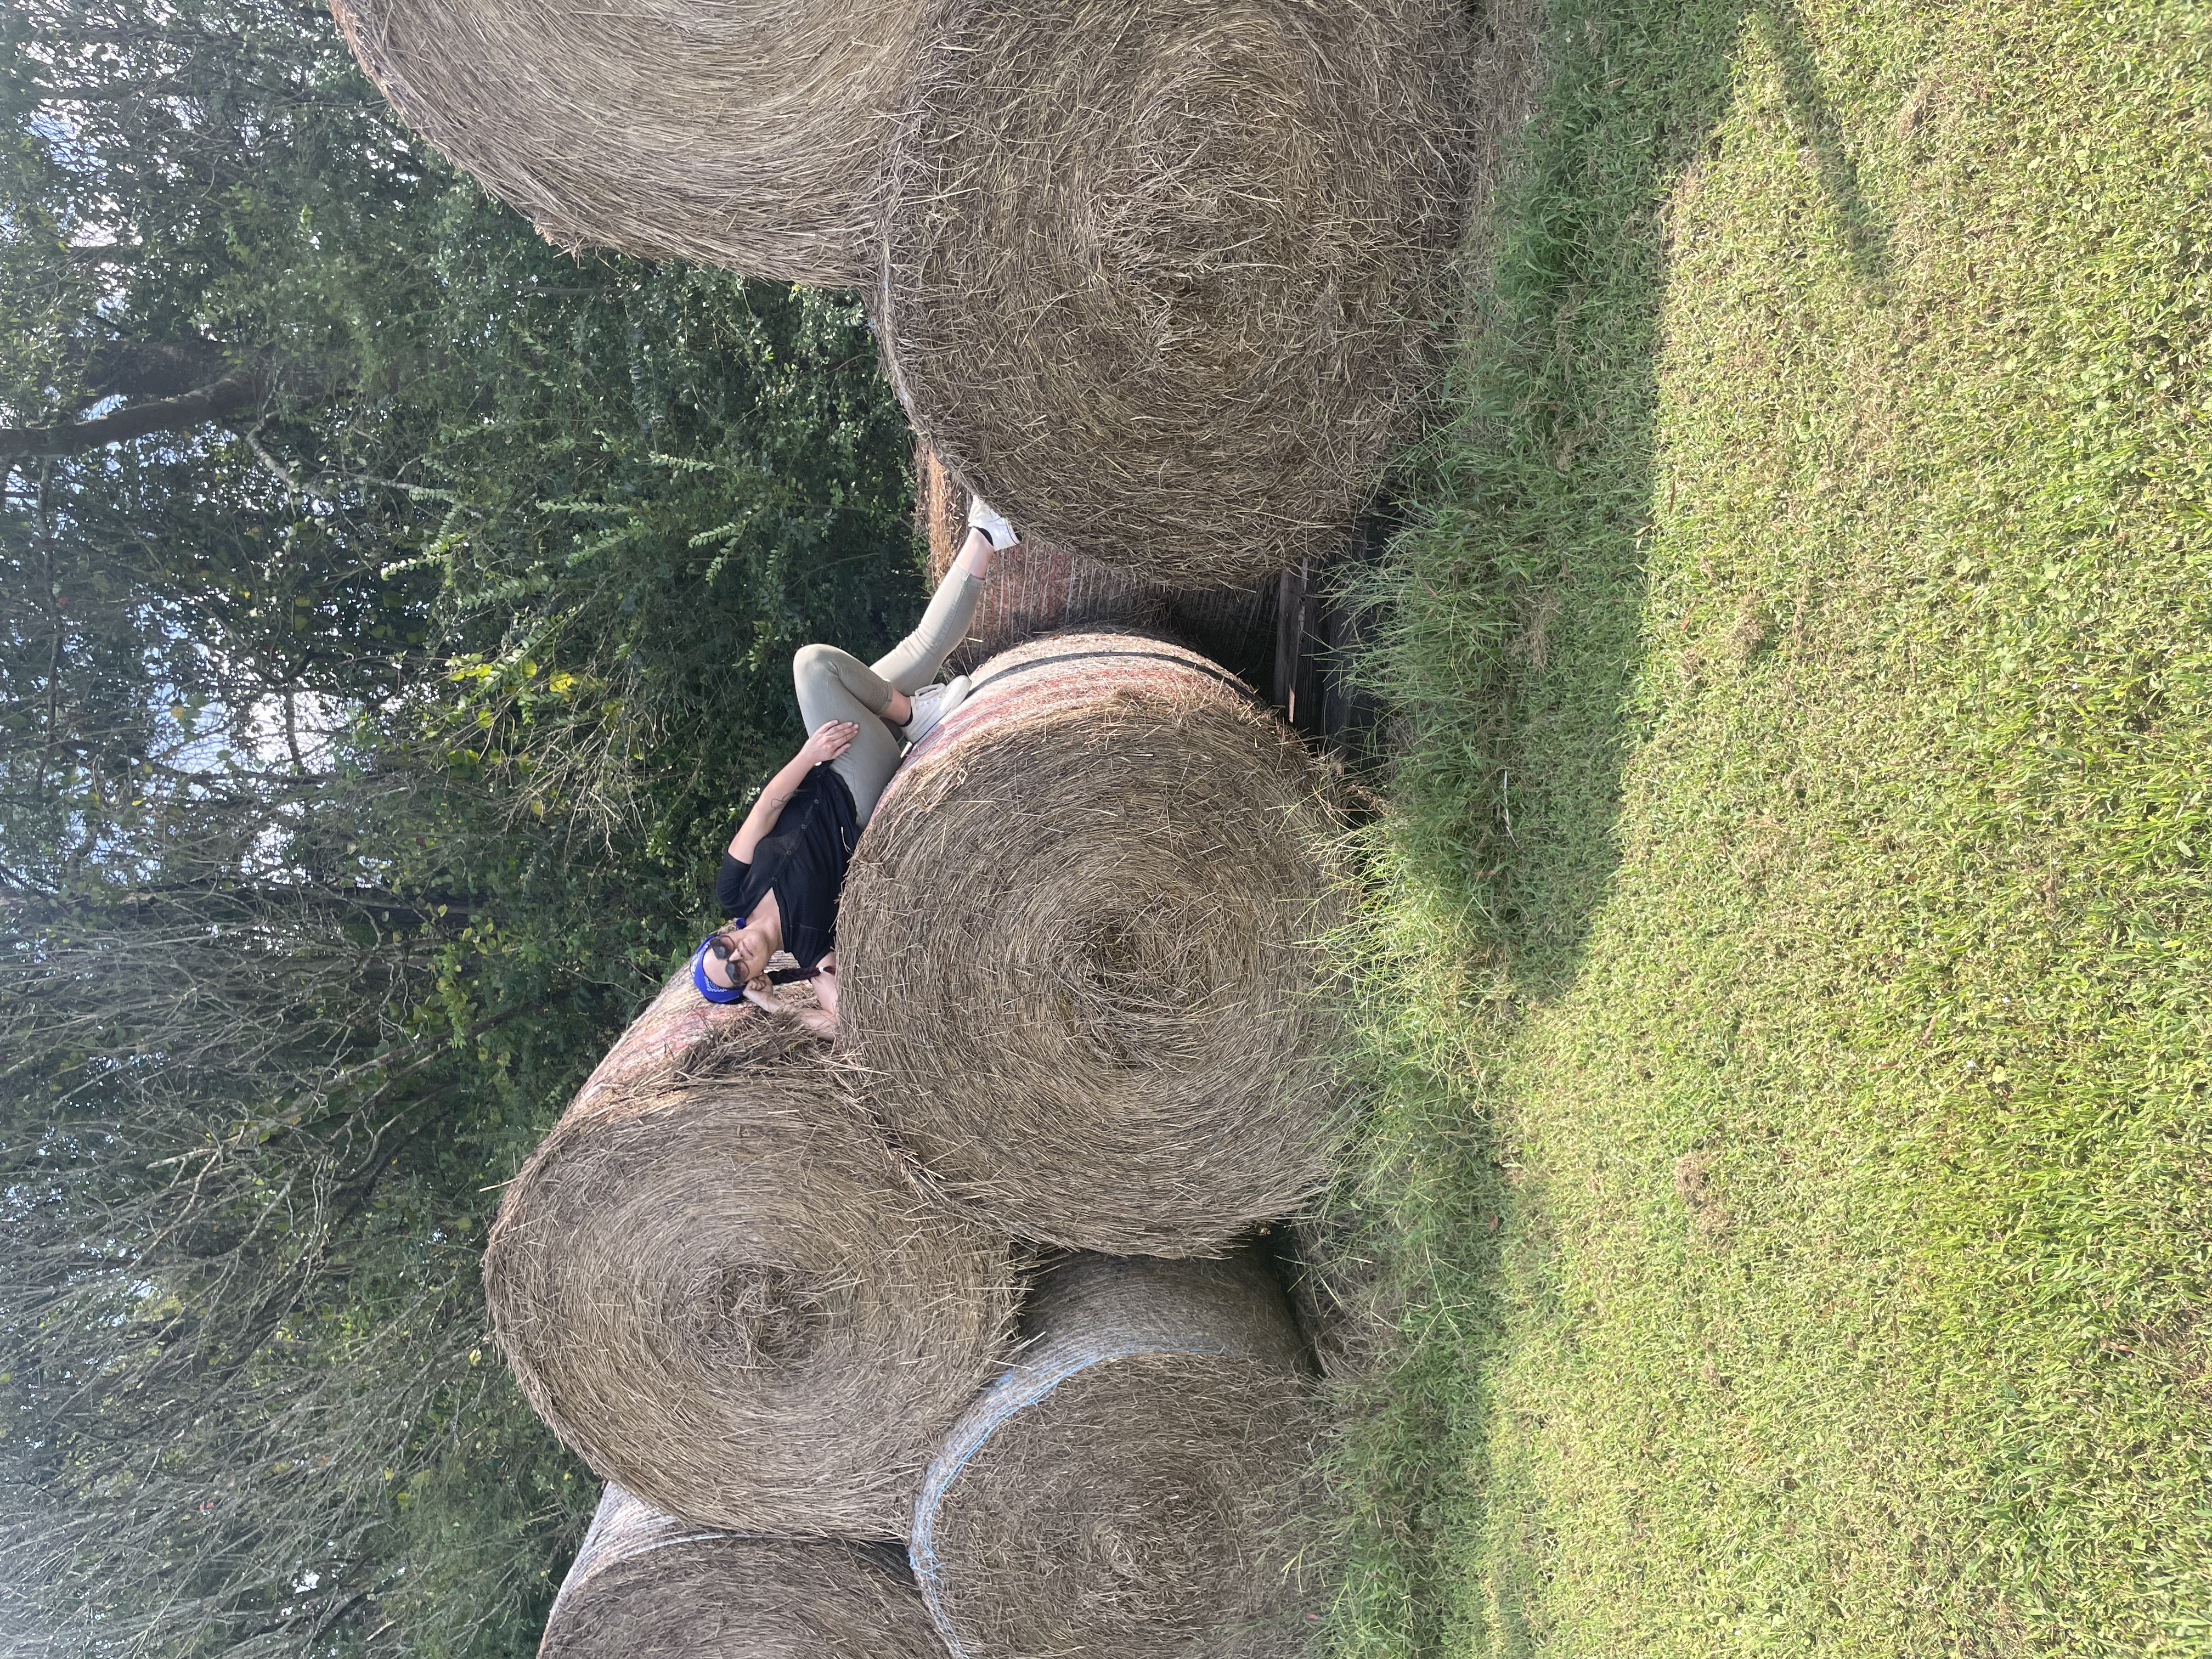 Climb on a round bale of hay